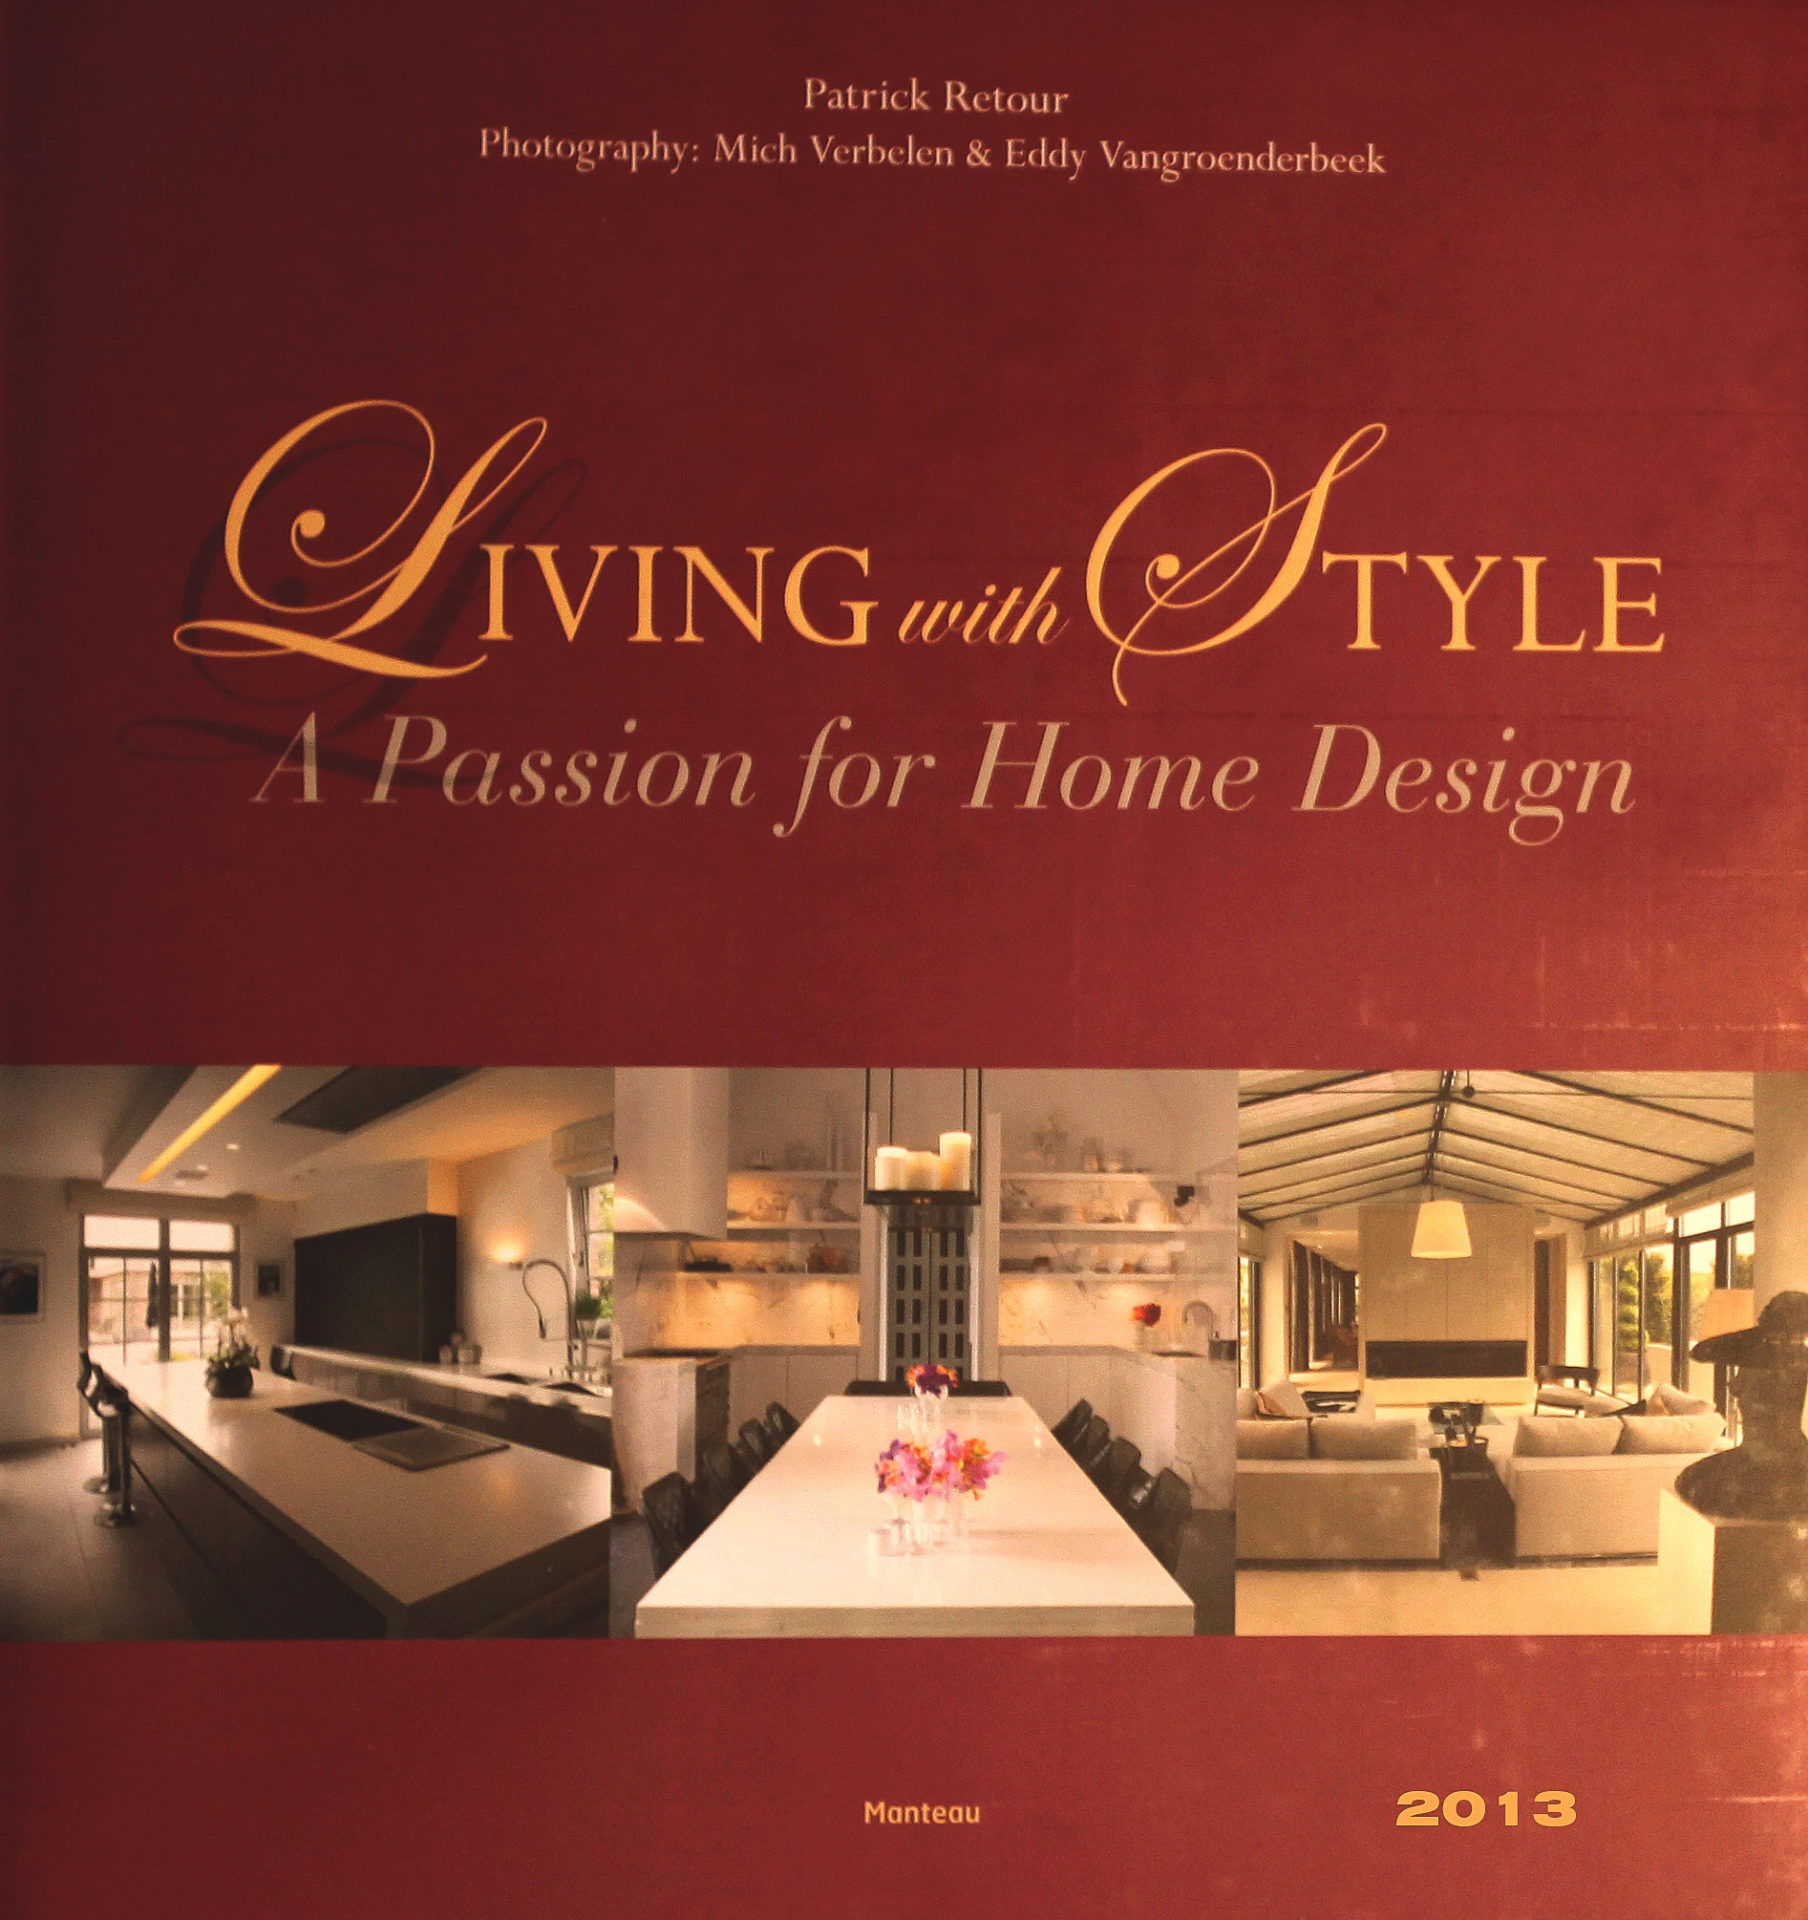 Living with style-villa in Leuven-2013